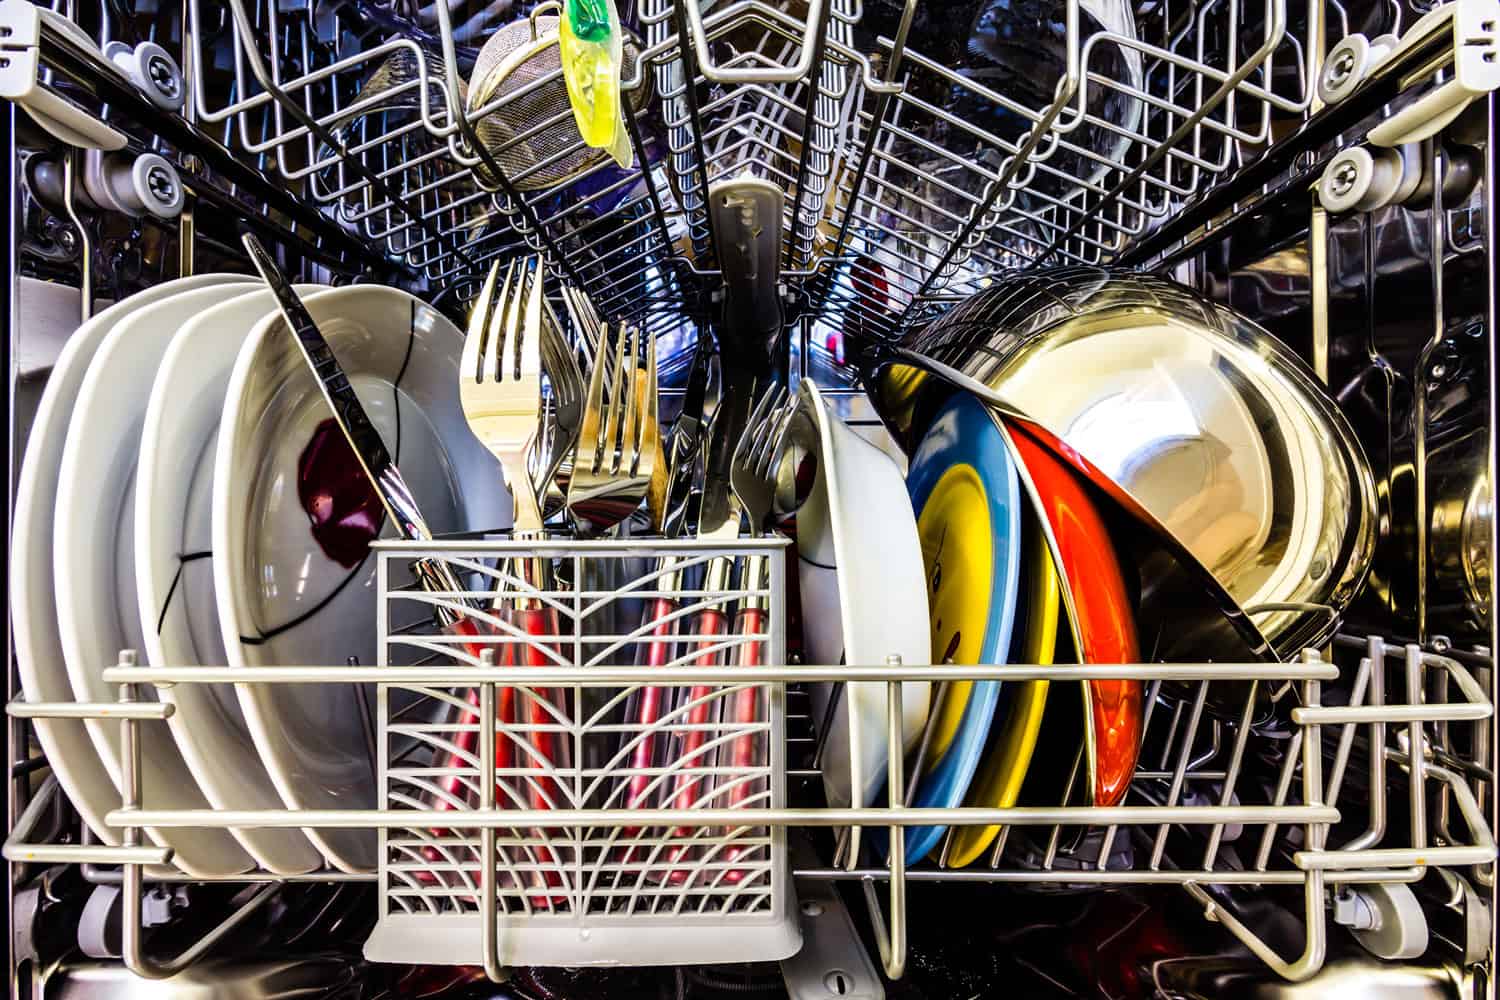 Dish washer full of clean dishes, colorful, How To Winterize A Dishwasher?